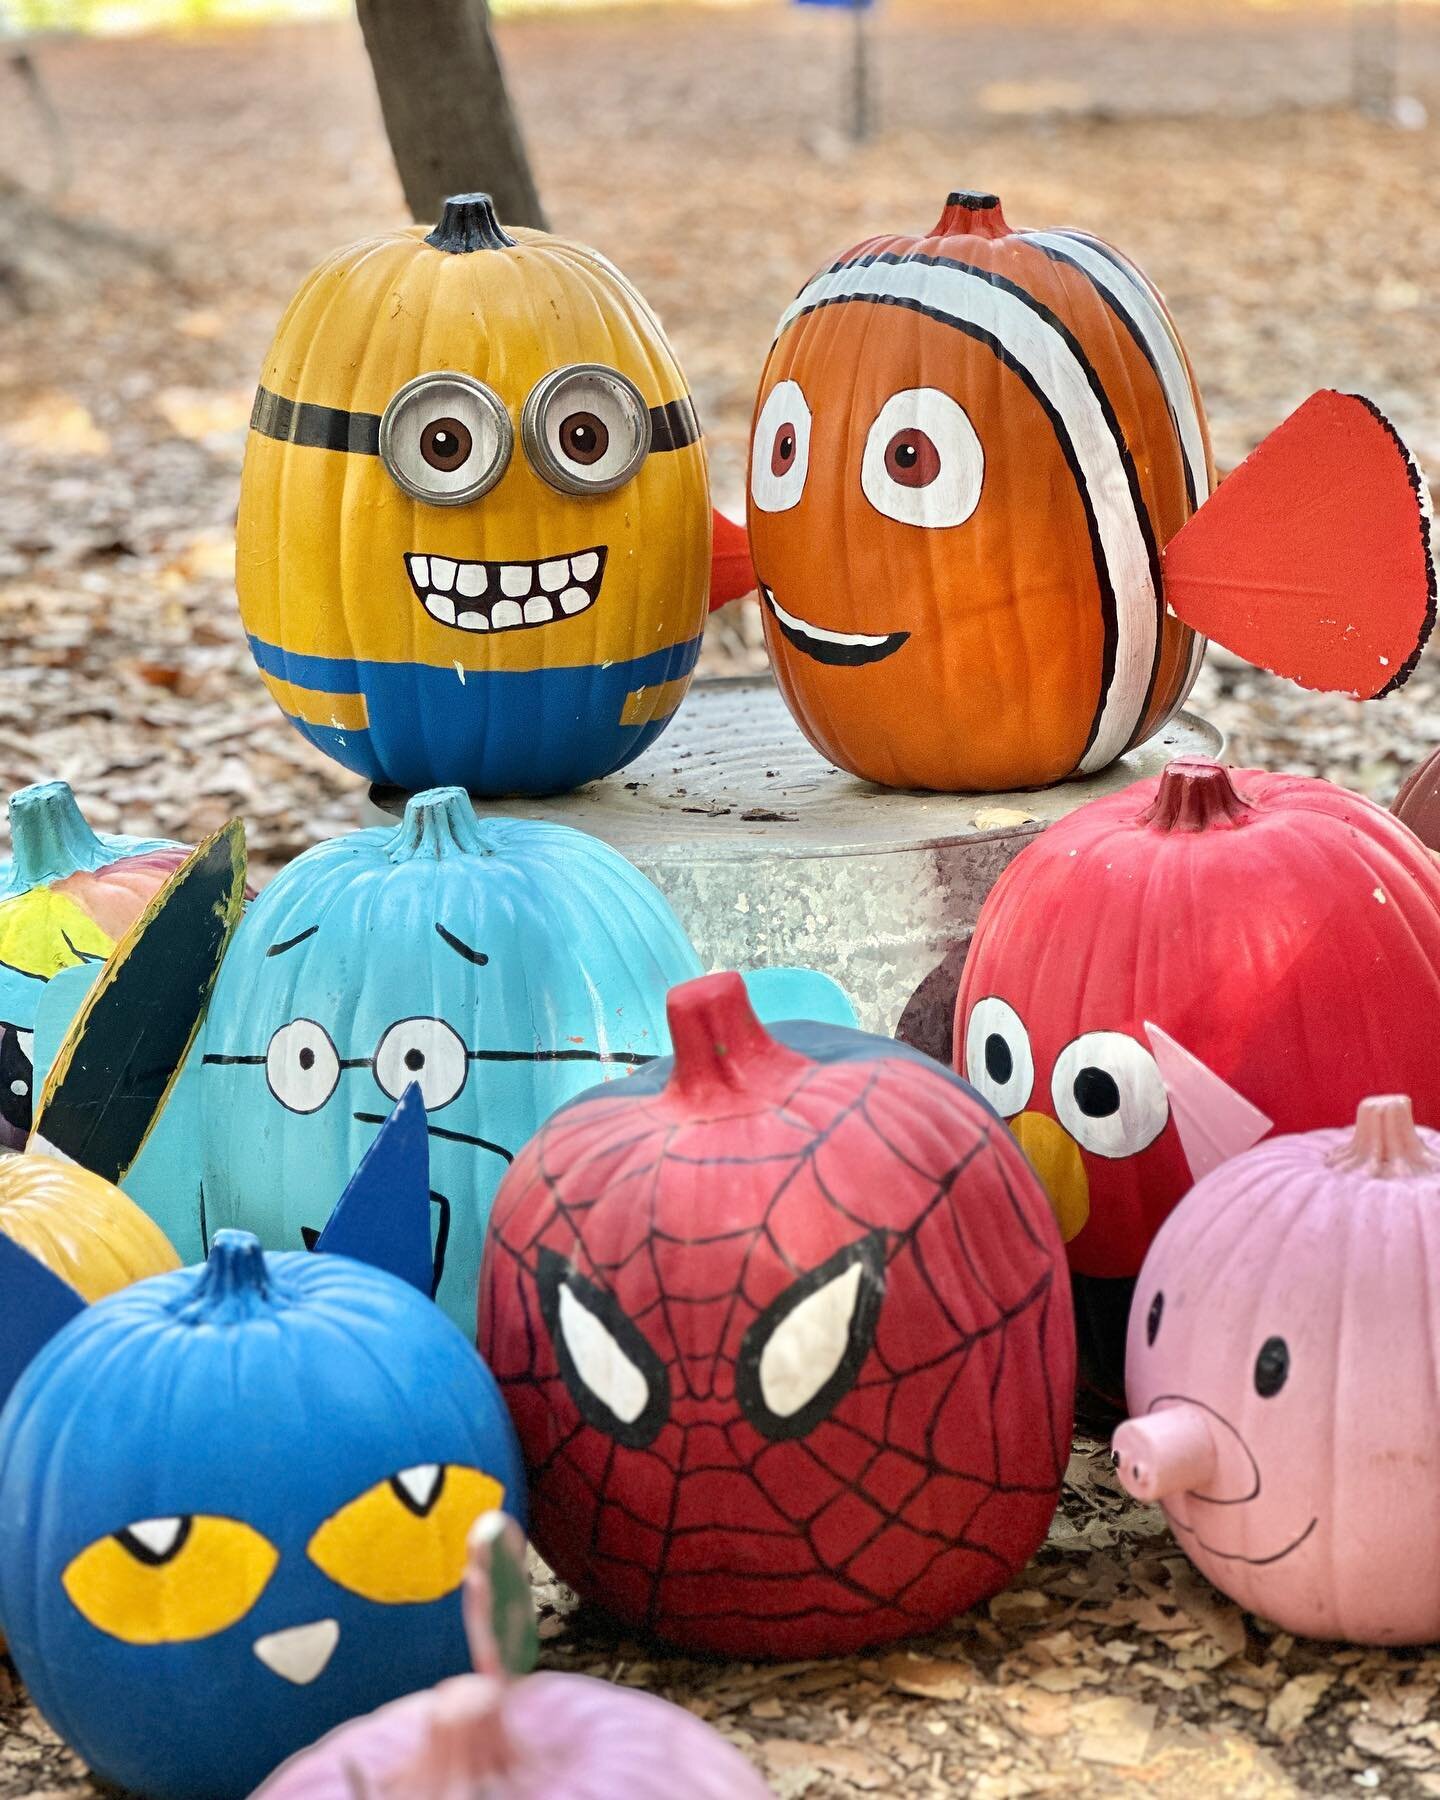 Meet the squad! 🎃 Ready to play hide and seek in the pumpkin patch this evening🤡 Can you spot them all? #PumpkinScavengerHunt #mefpumpkinpatch